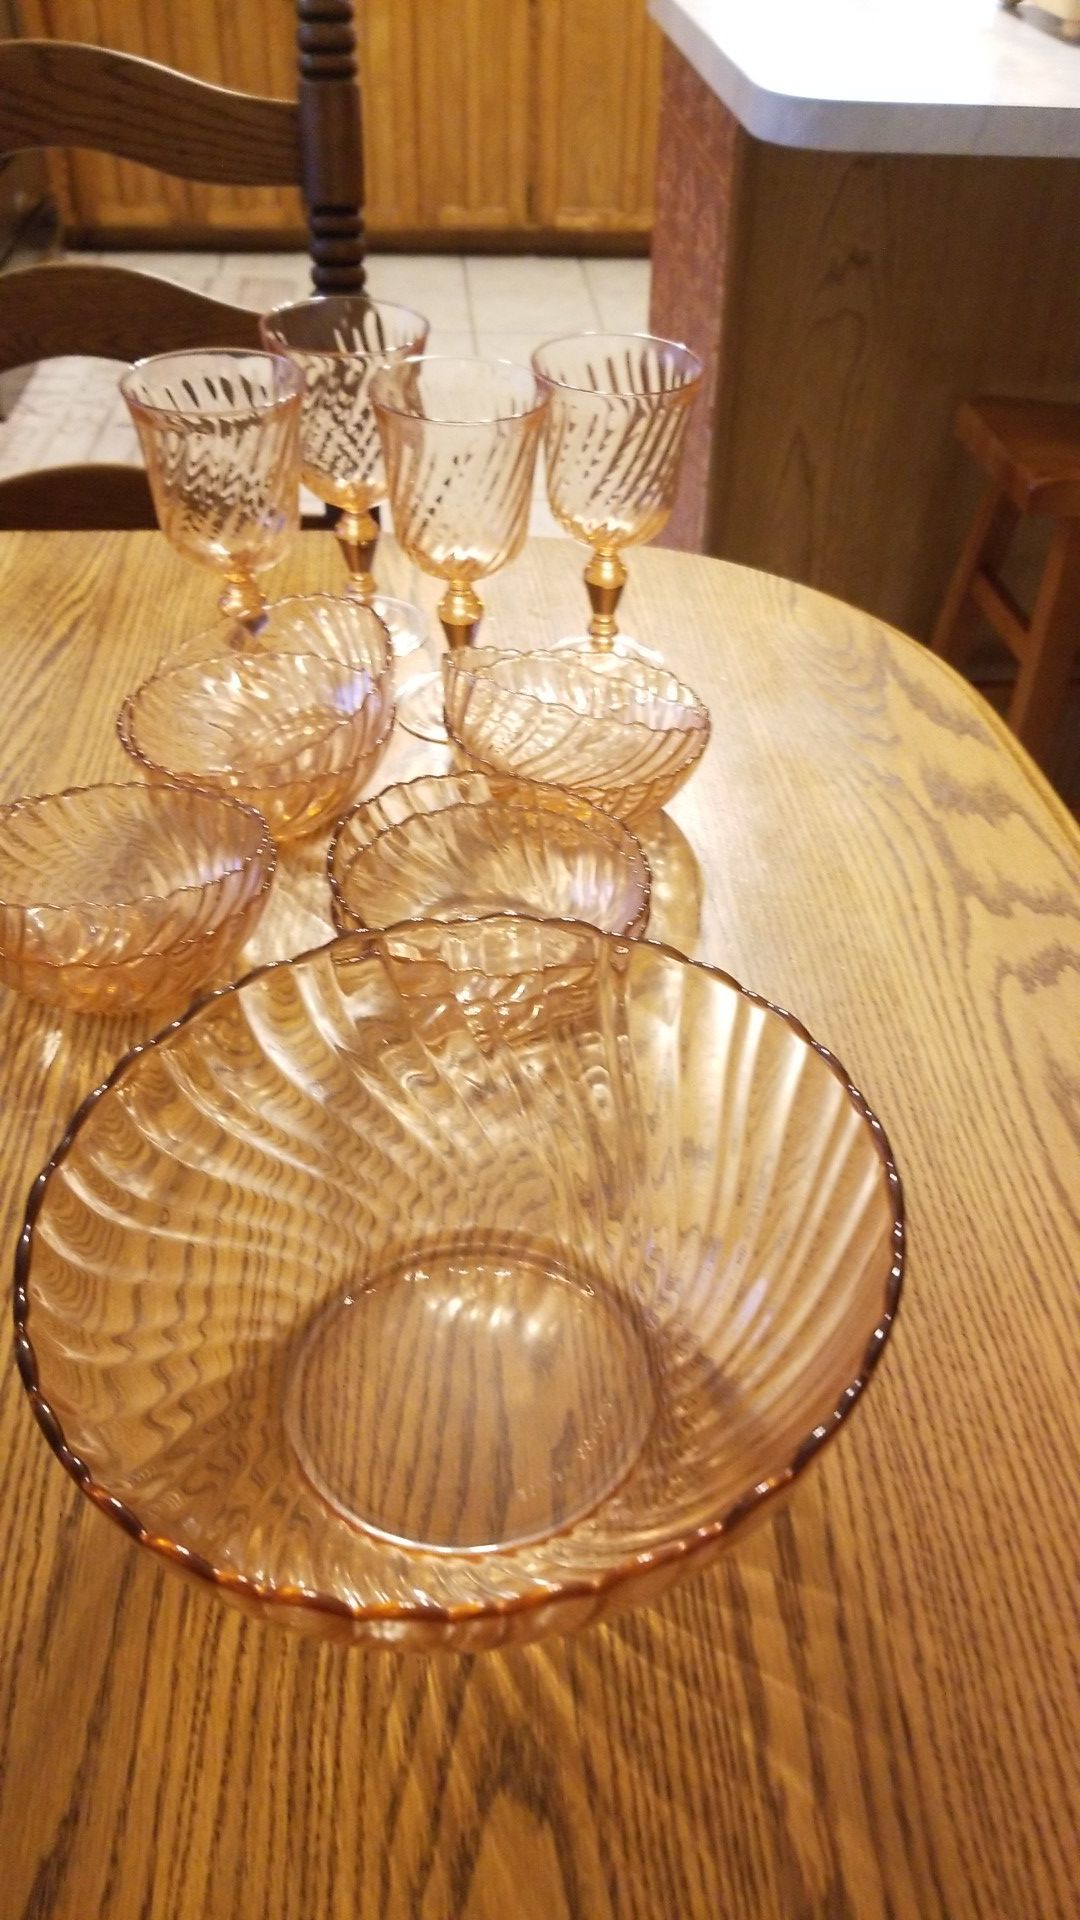 Pink arcoroc bowls and goblets